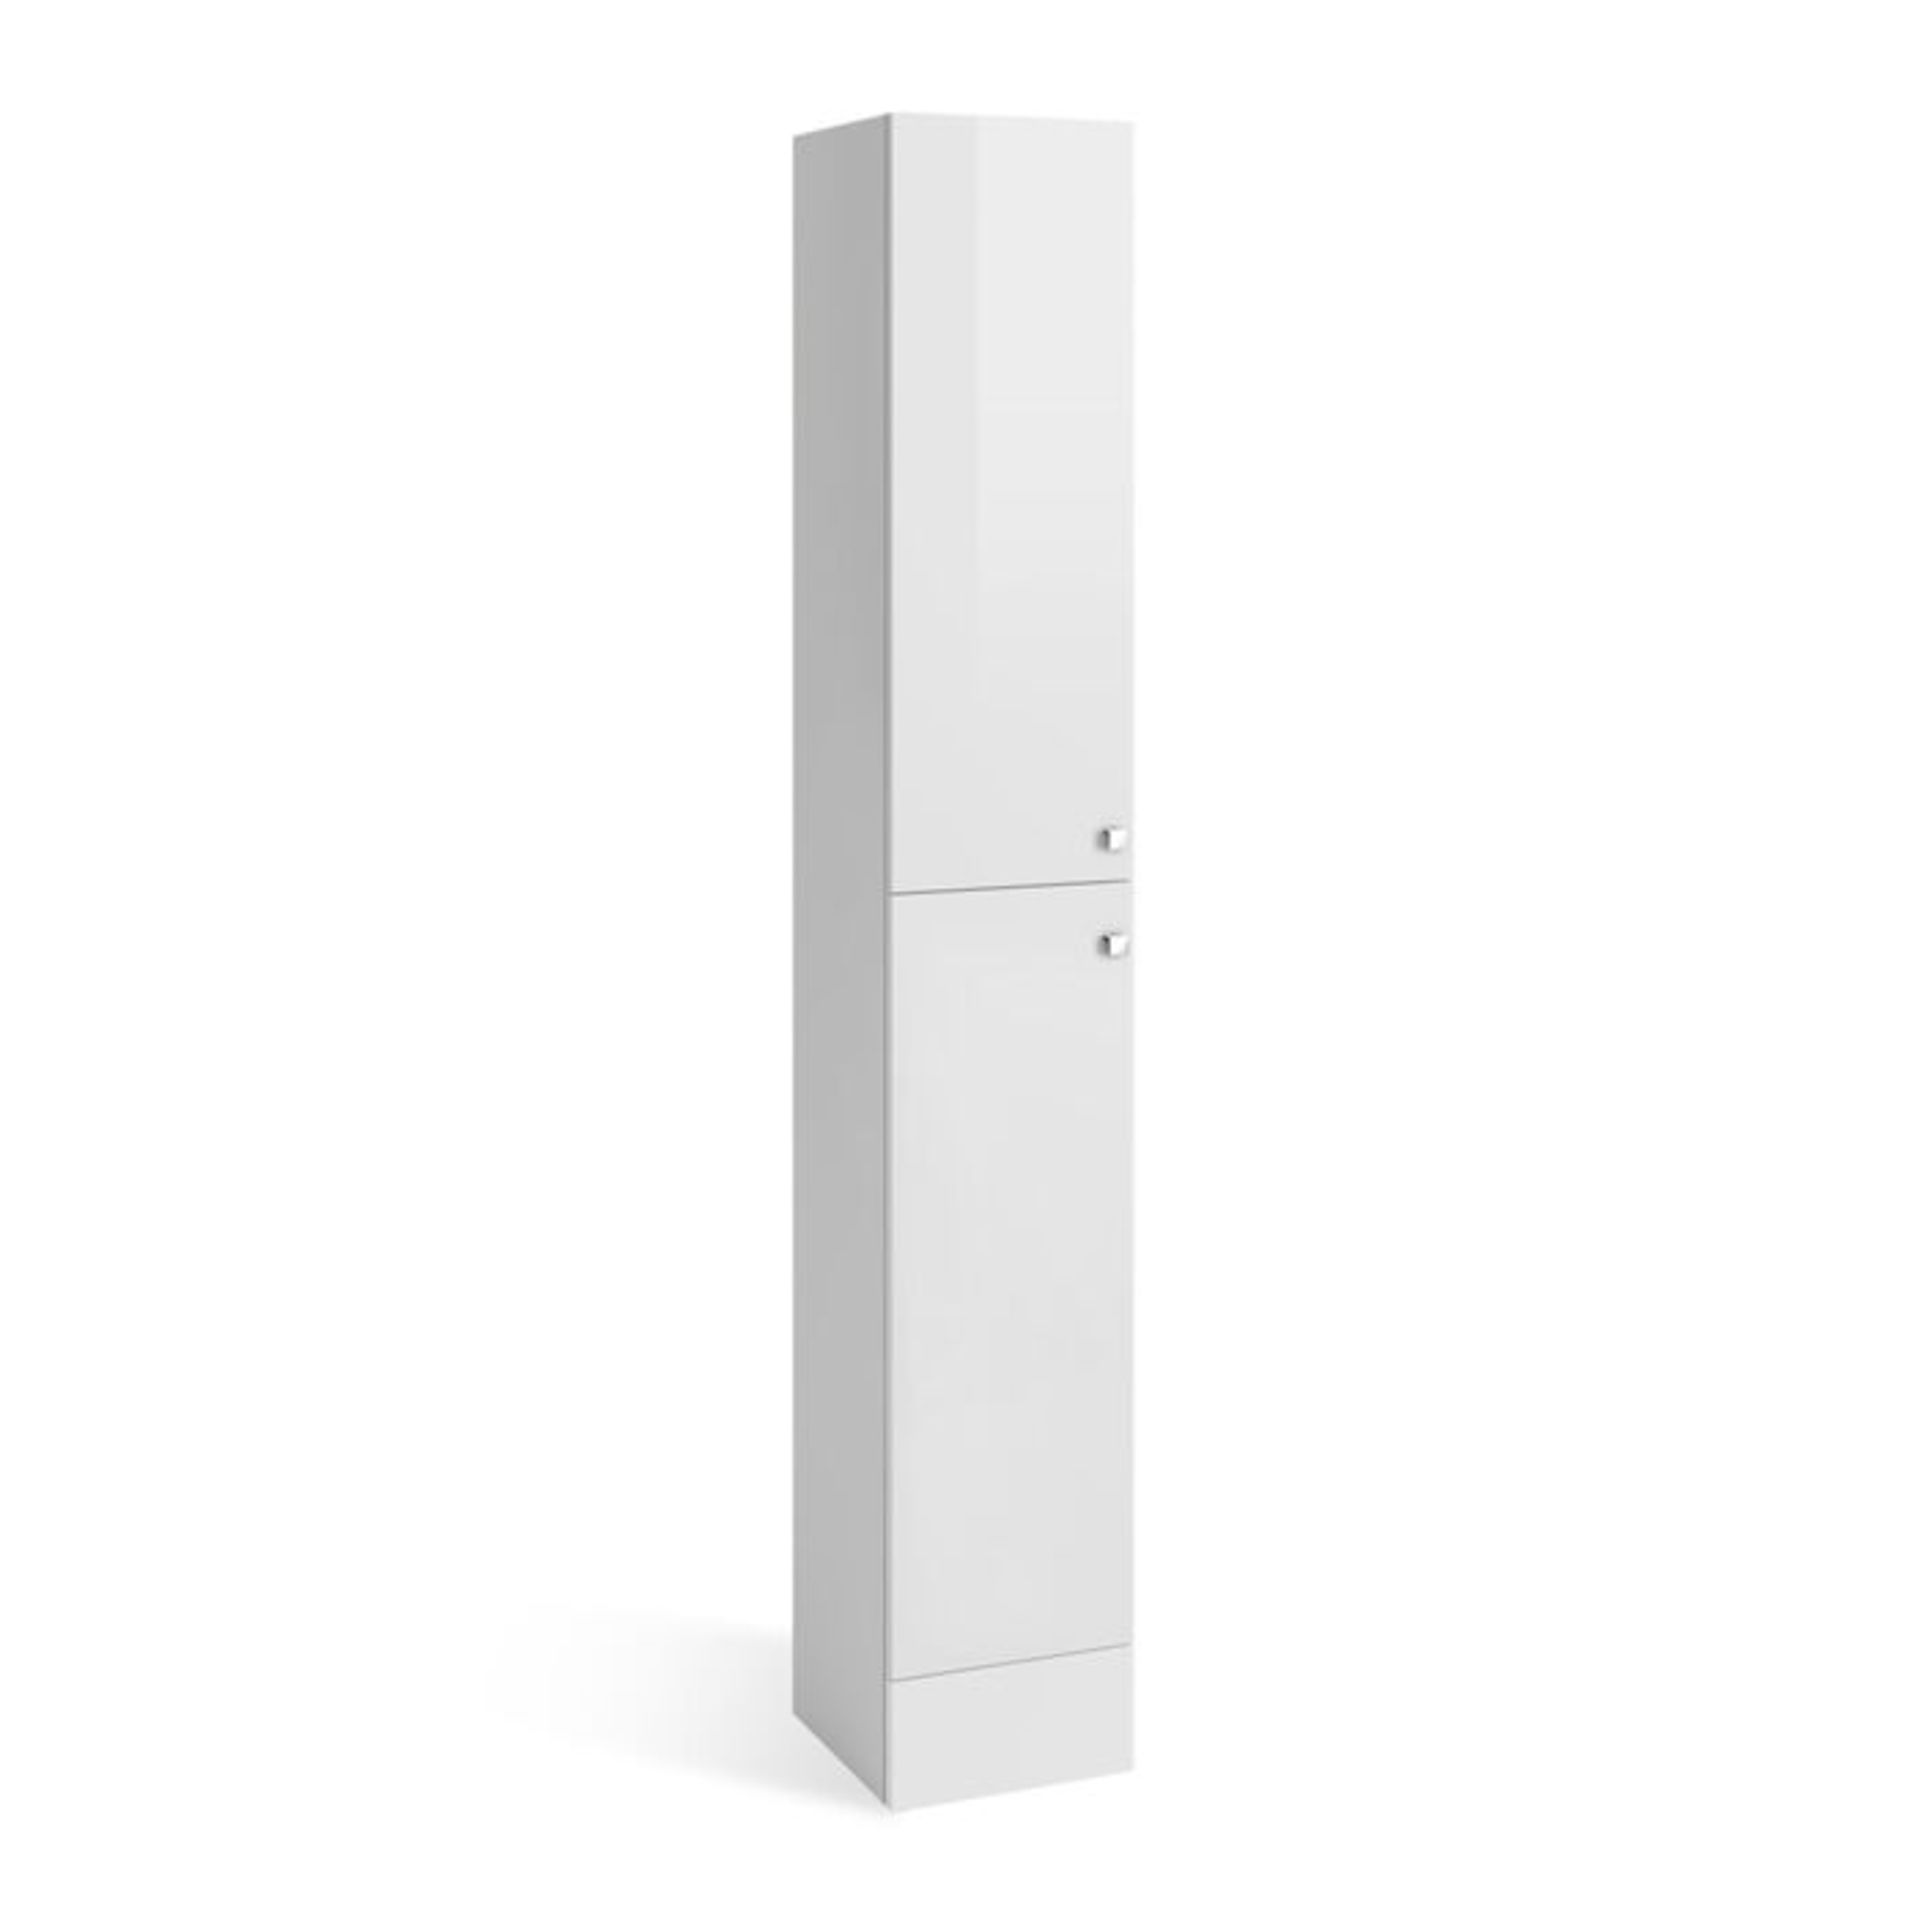 (PP23) 1900x300mm Harper Gloss White Tall Storage Cabinet - Floor Standing. RRP £299.99. Our t... - Image 4 of 4